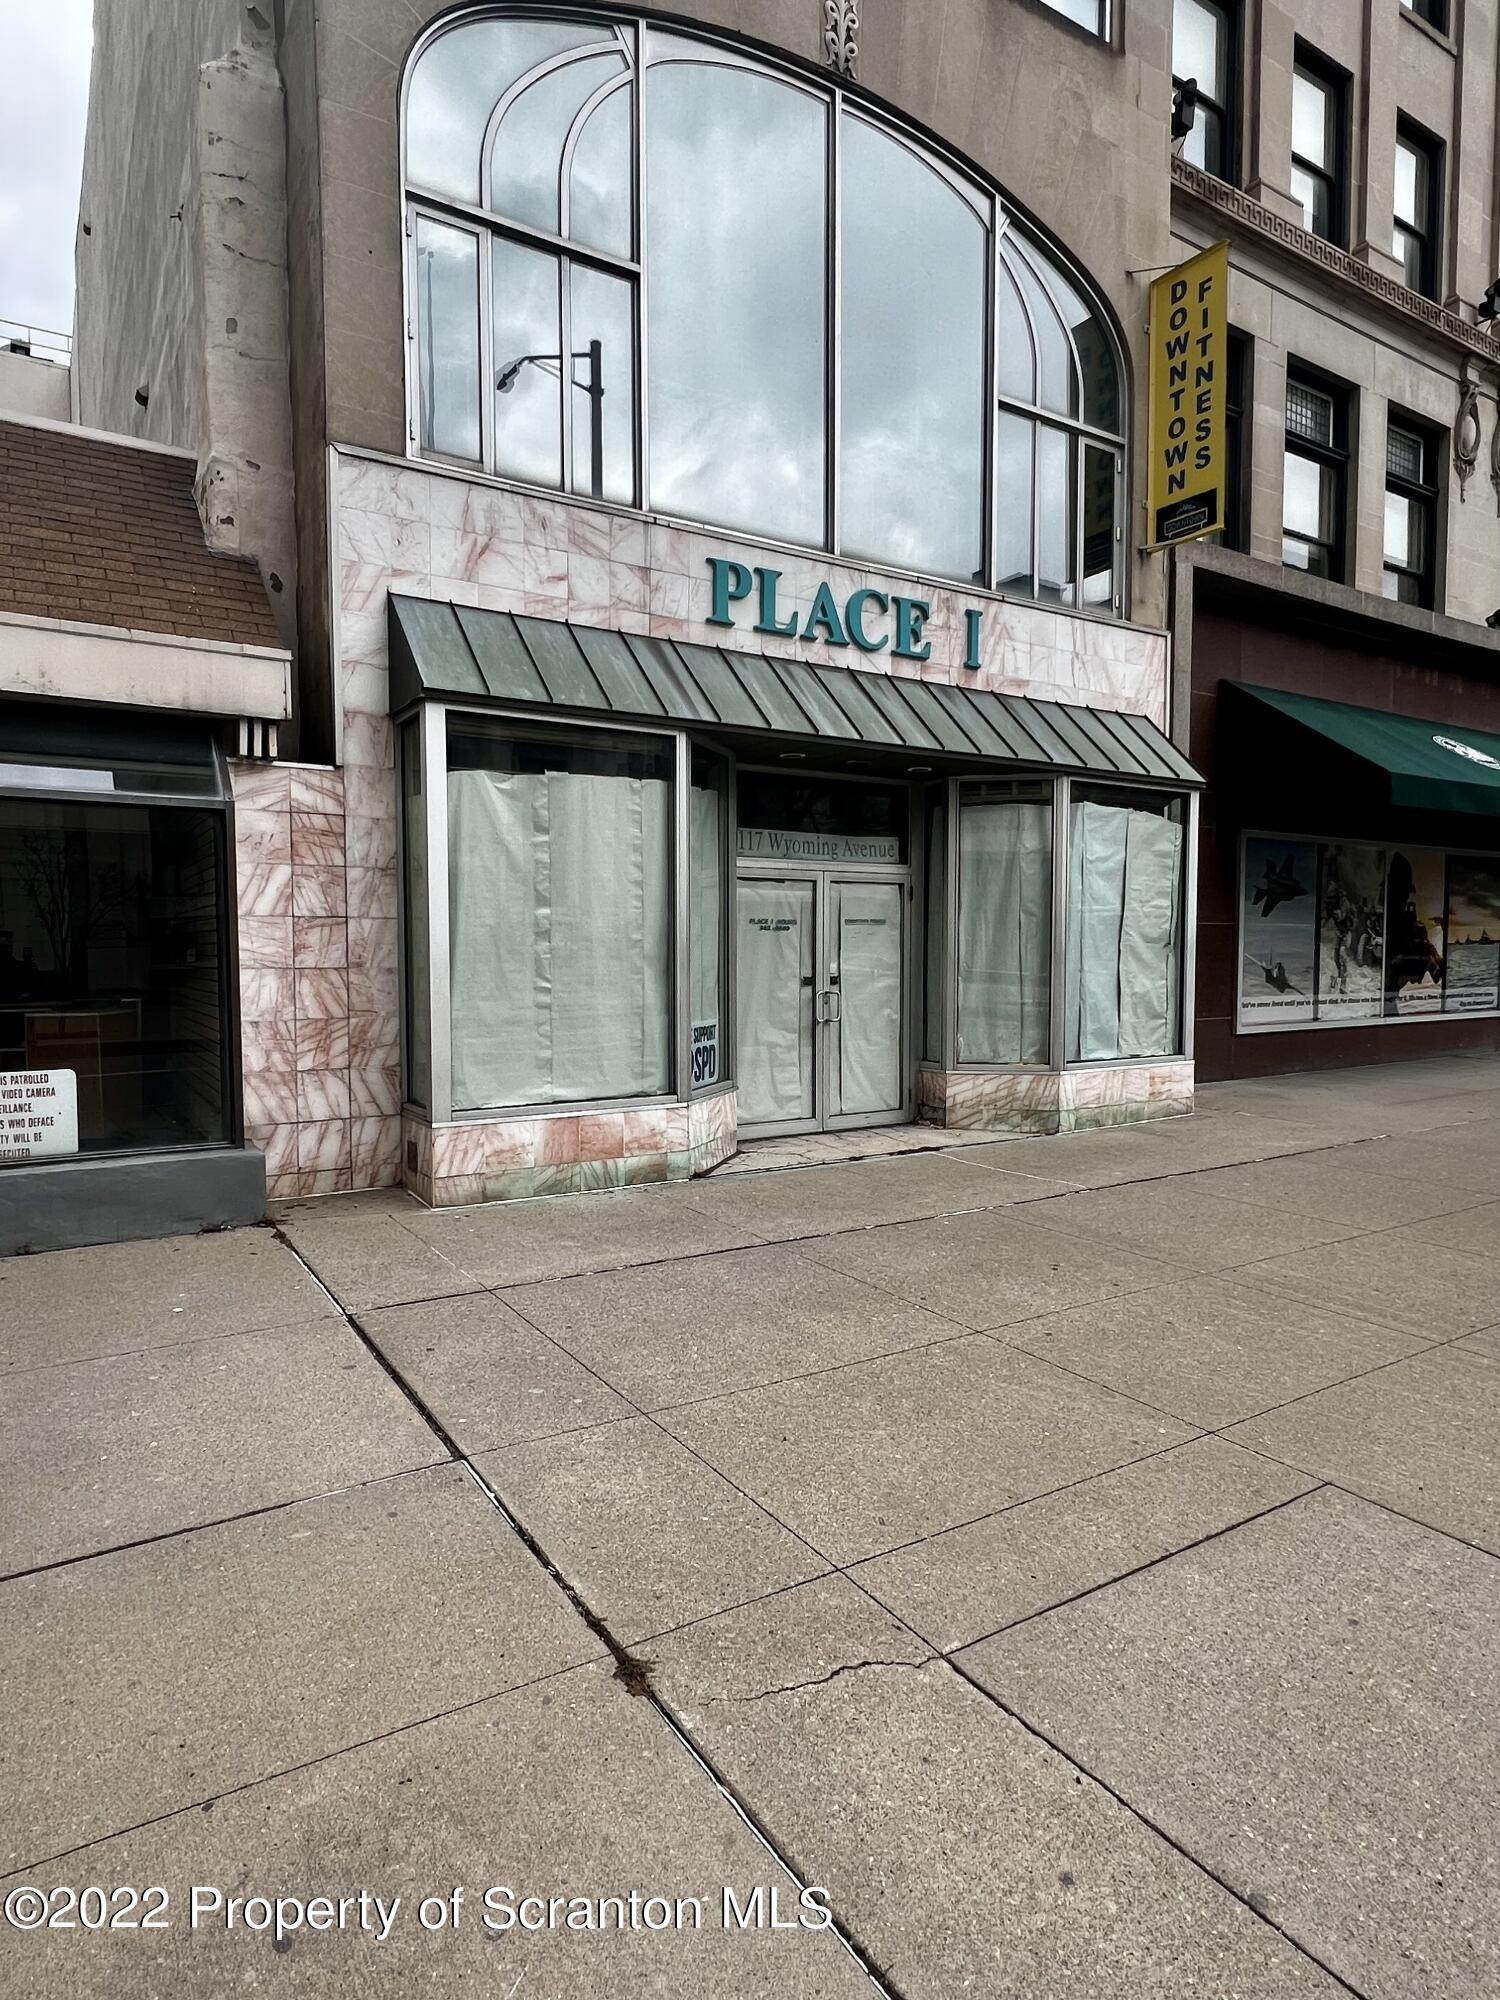 Commercial for Sale at 117 Wyoming Ave Scranton, Pennsylvania 18503 United States